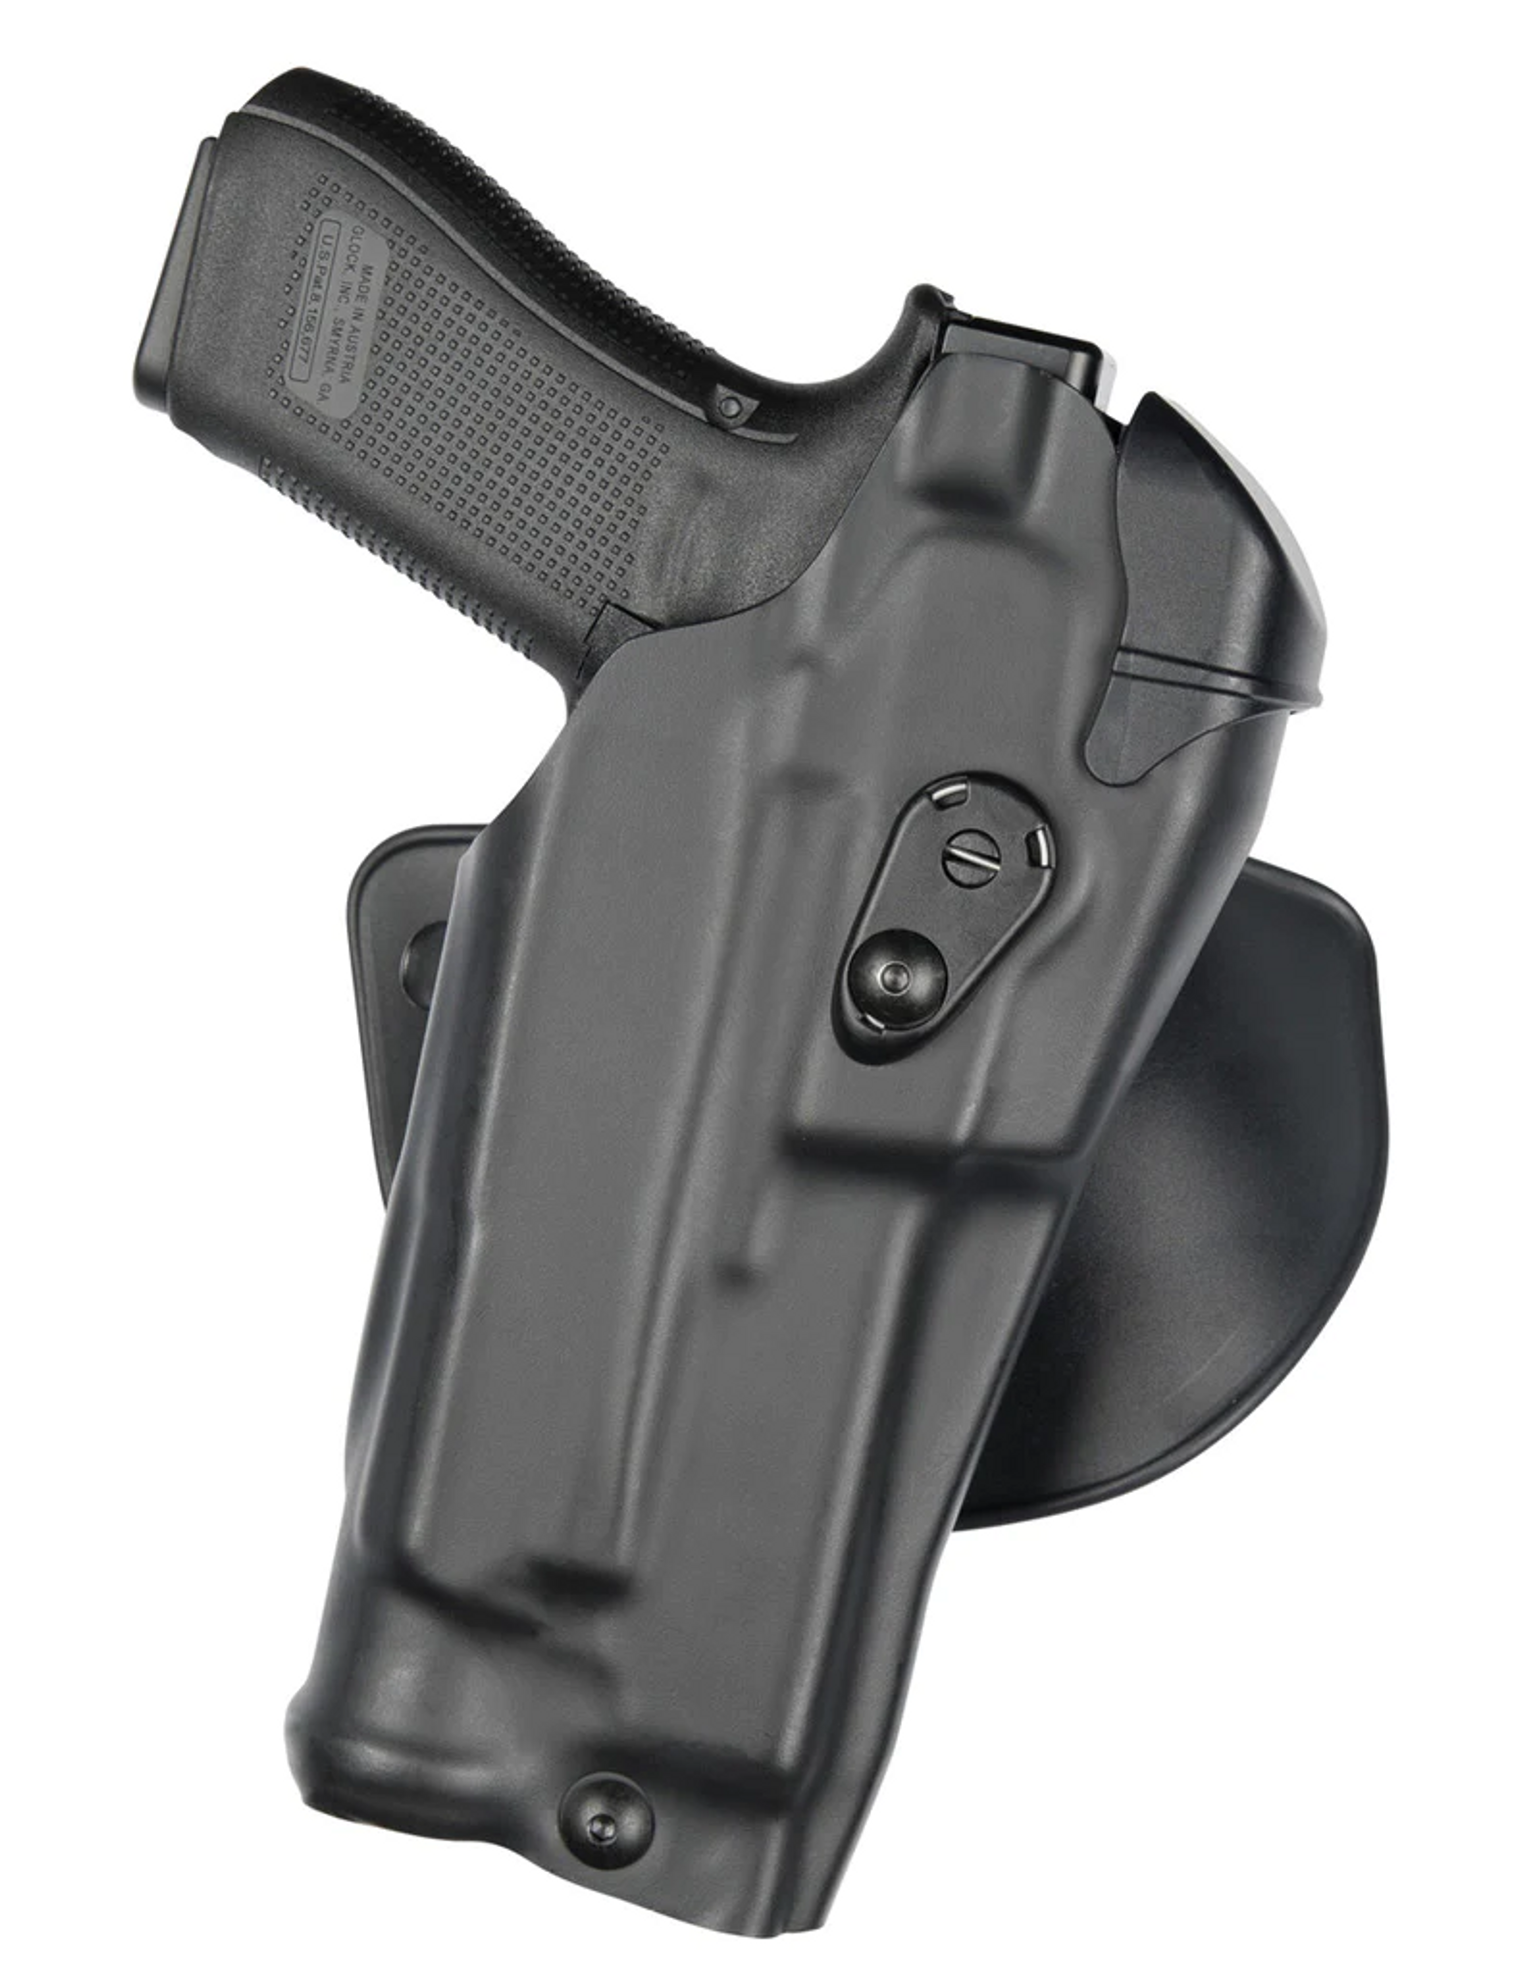 Model 6378rds Als Concealment Paddle Holster For Glock 17 Mos W/ Light